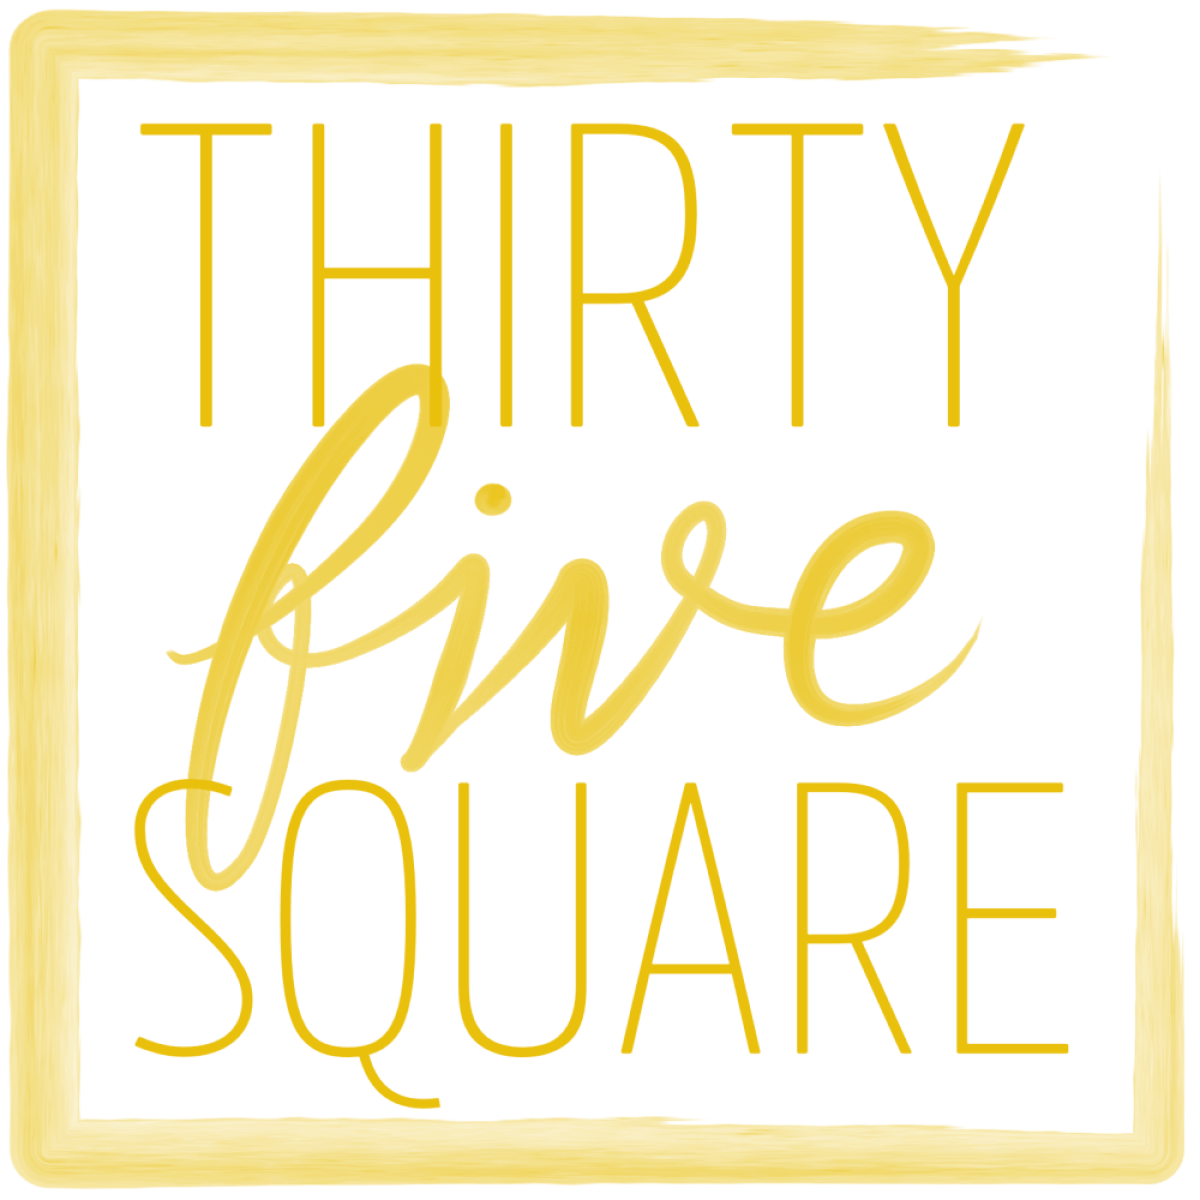 The Thirty Five Square logo is the business name inside a watercolour square